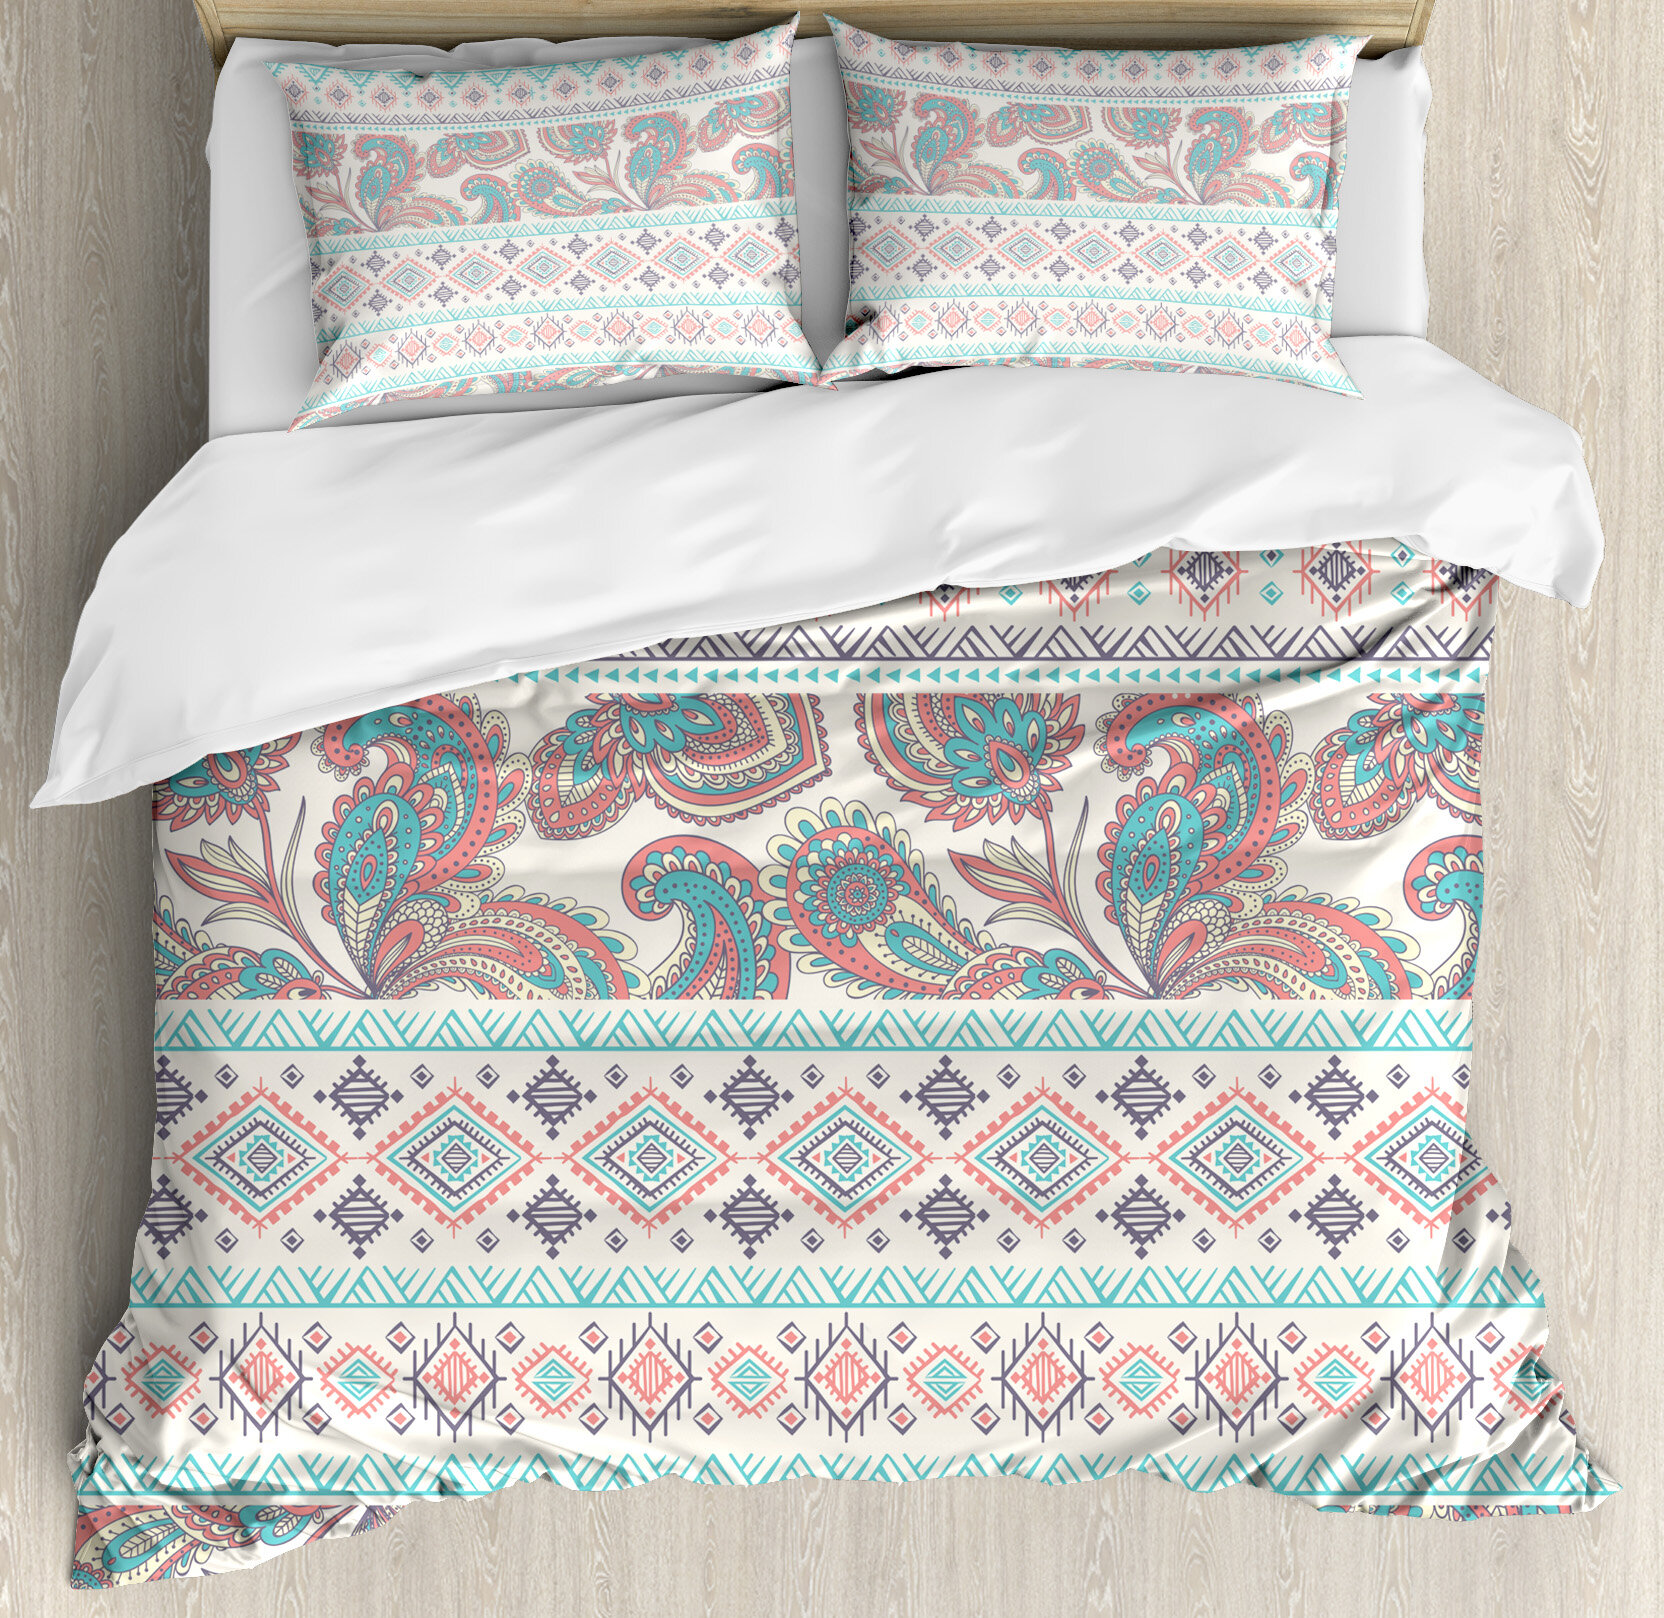 East Urban Home Tribal Paisley Patterns In Native Aztec Mixed